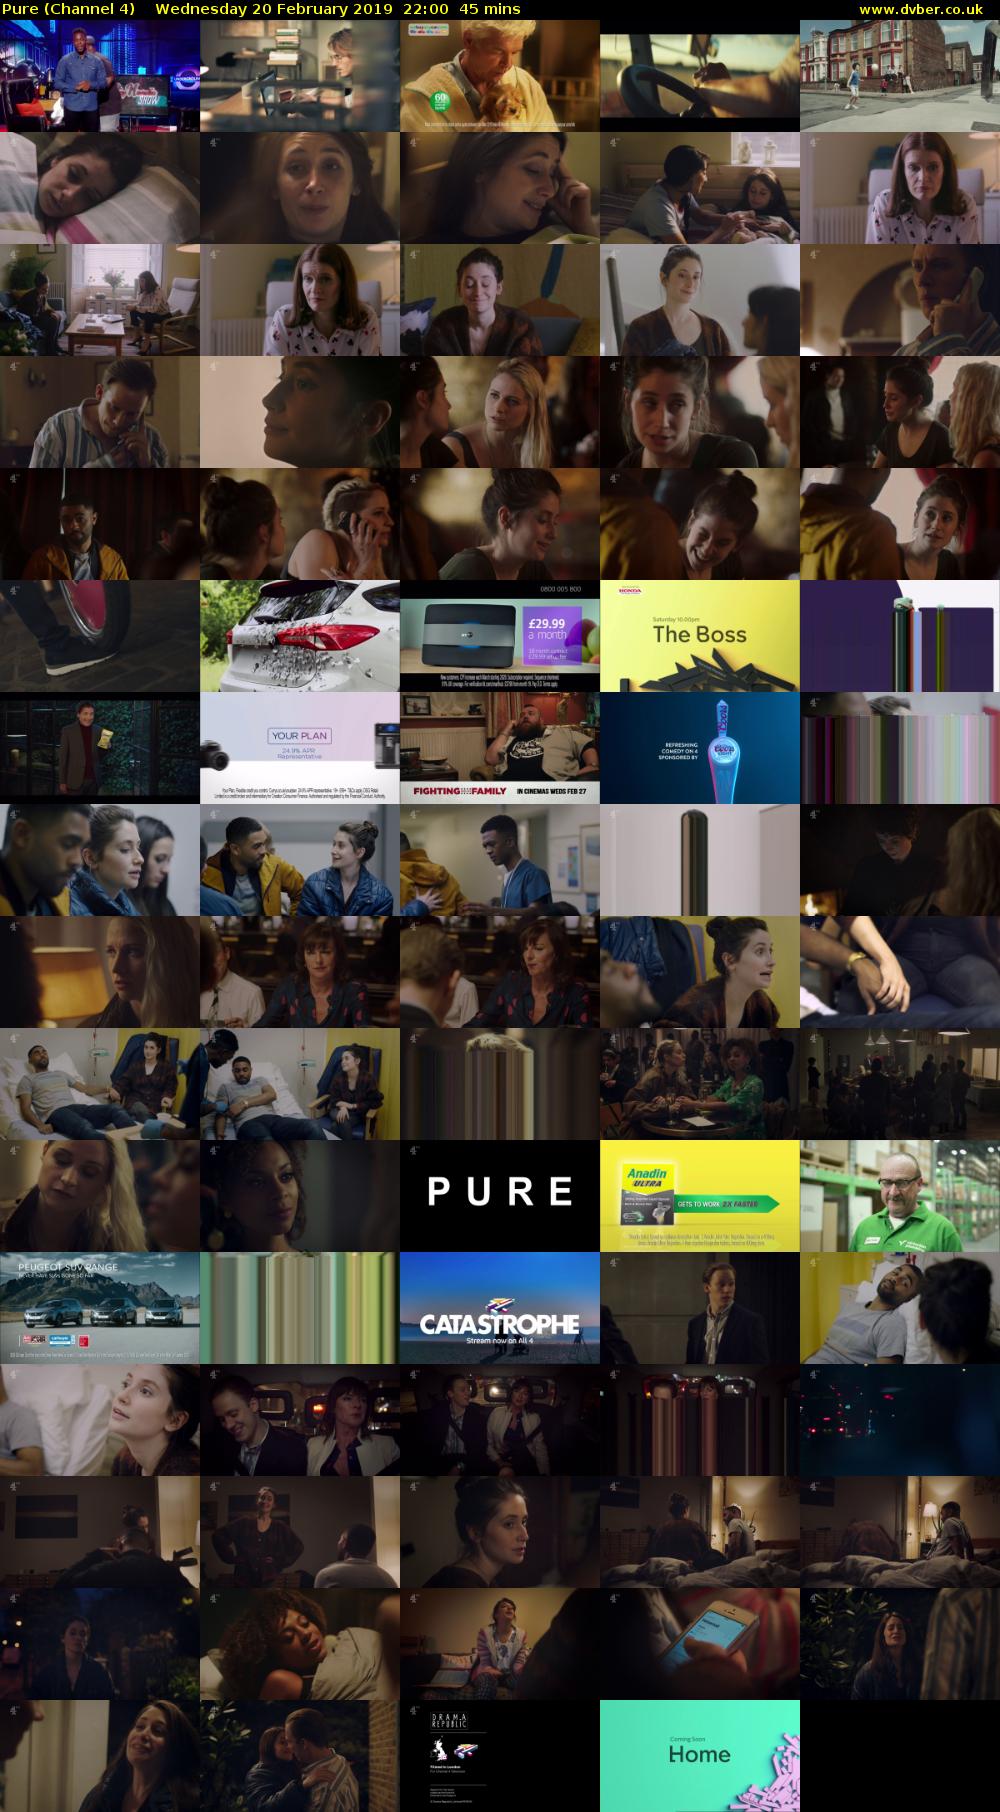 Pure (Channel 4) Wednesday 20 February 2019 22:00 - 22:45